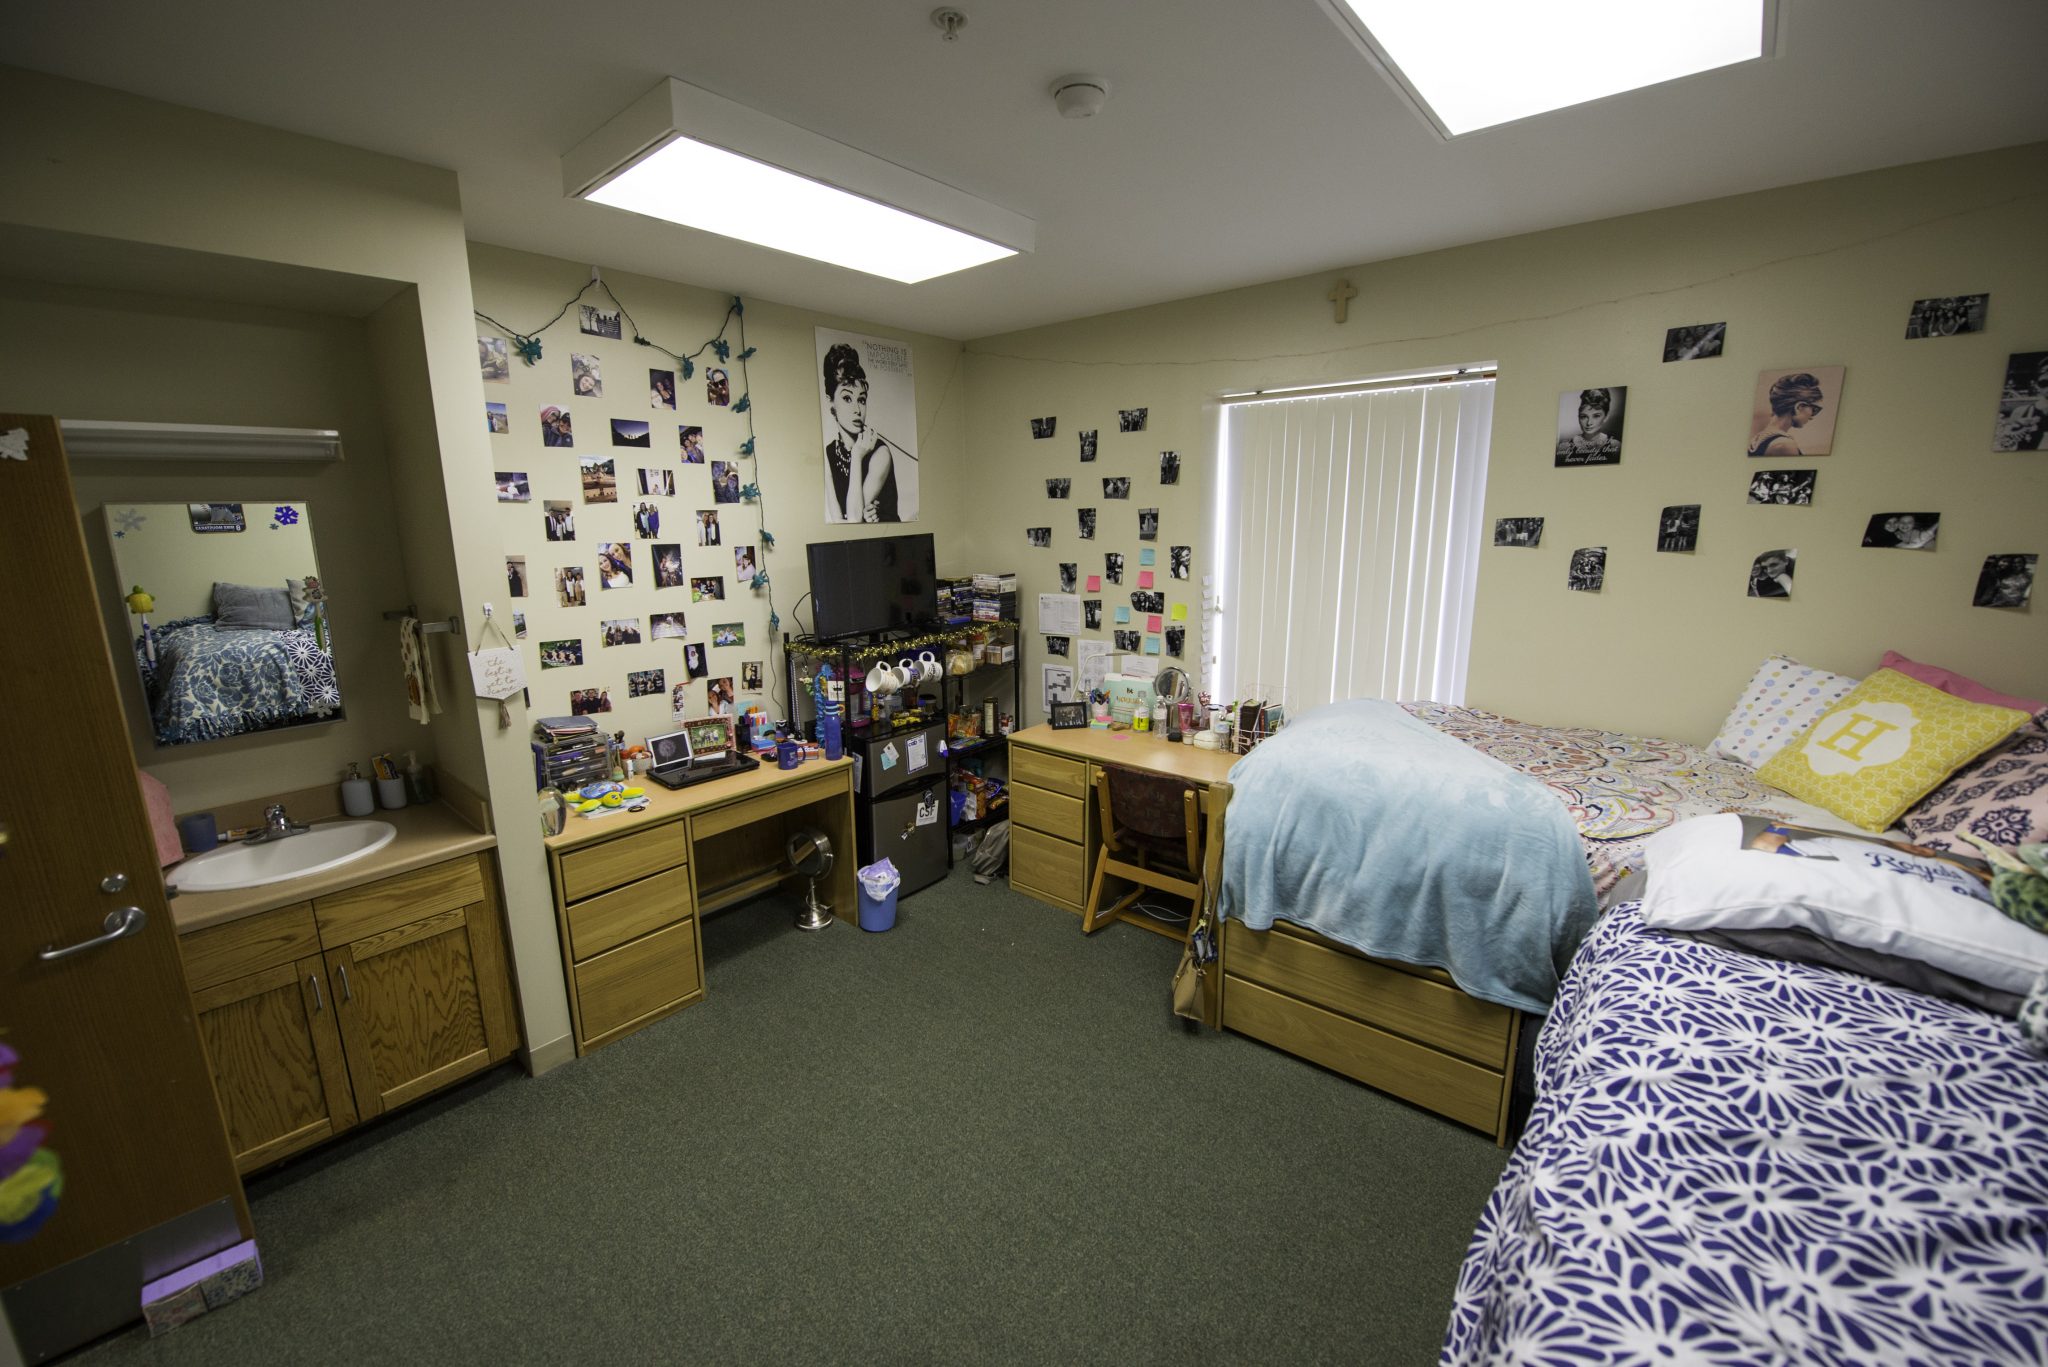 Another view of a Morgan dorm room